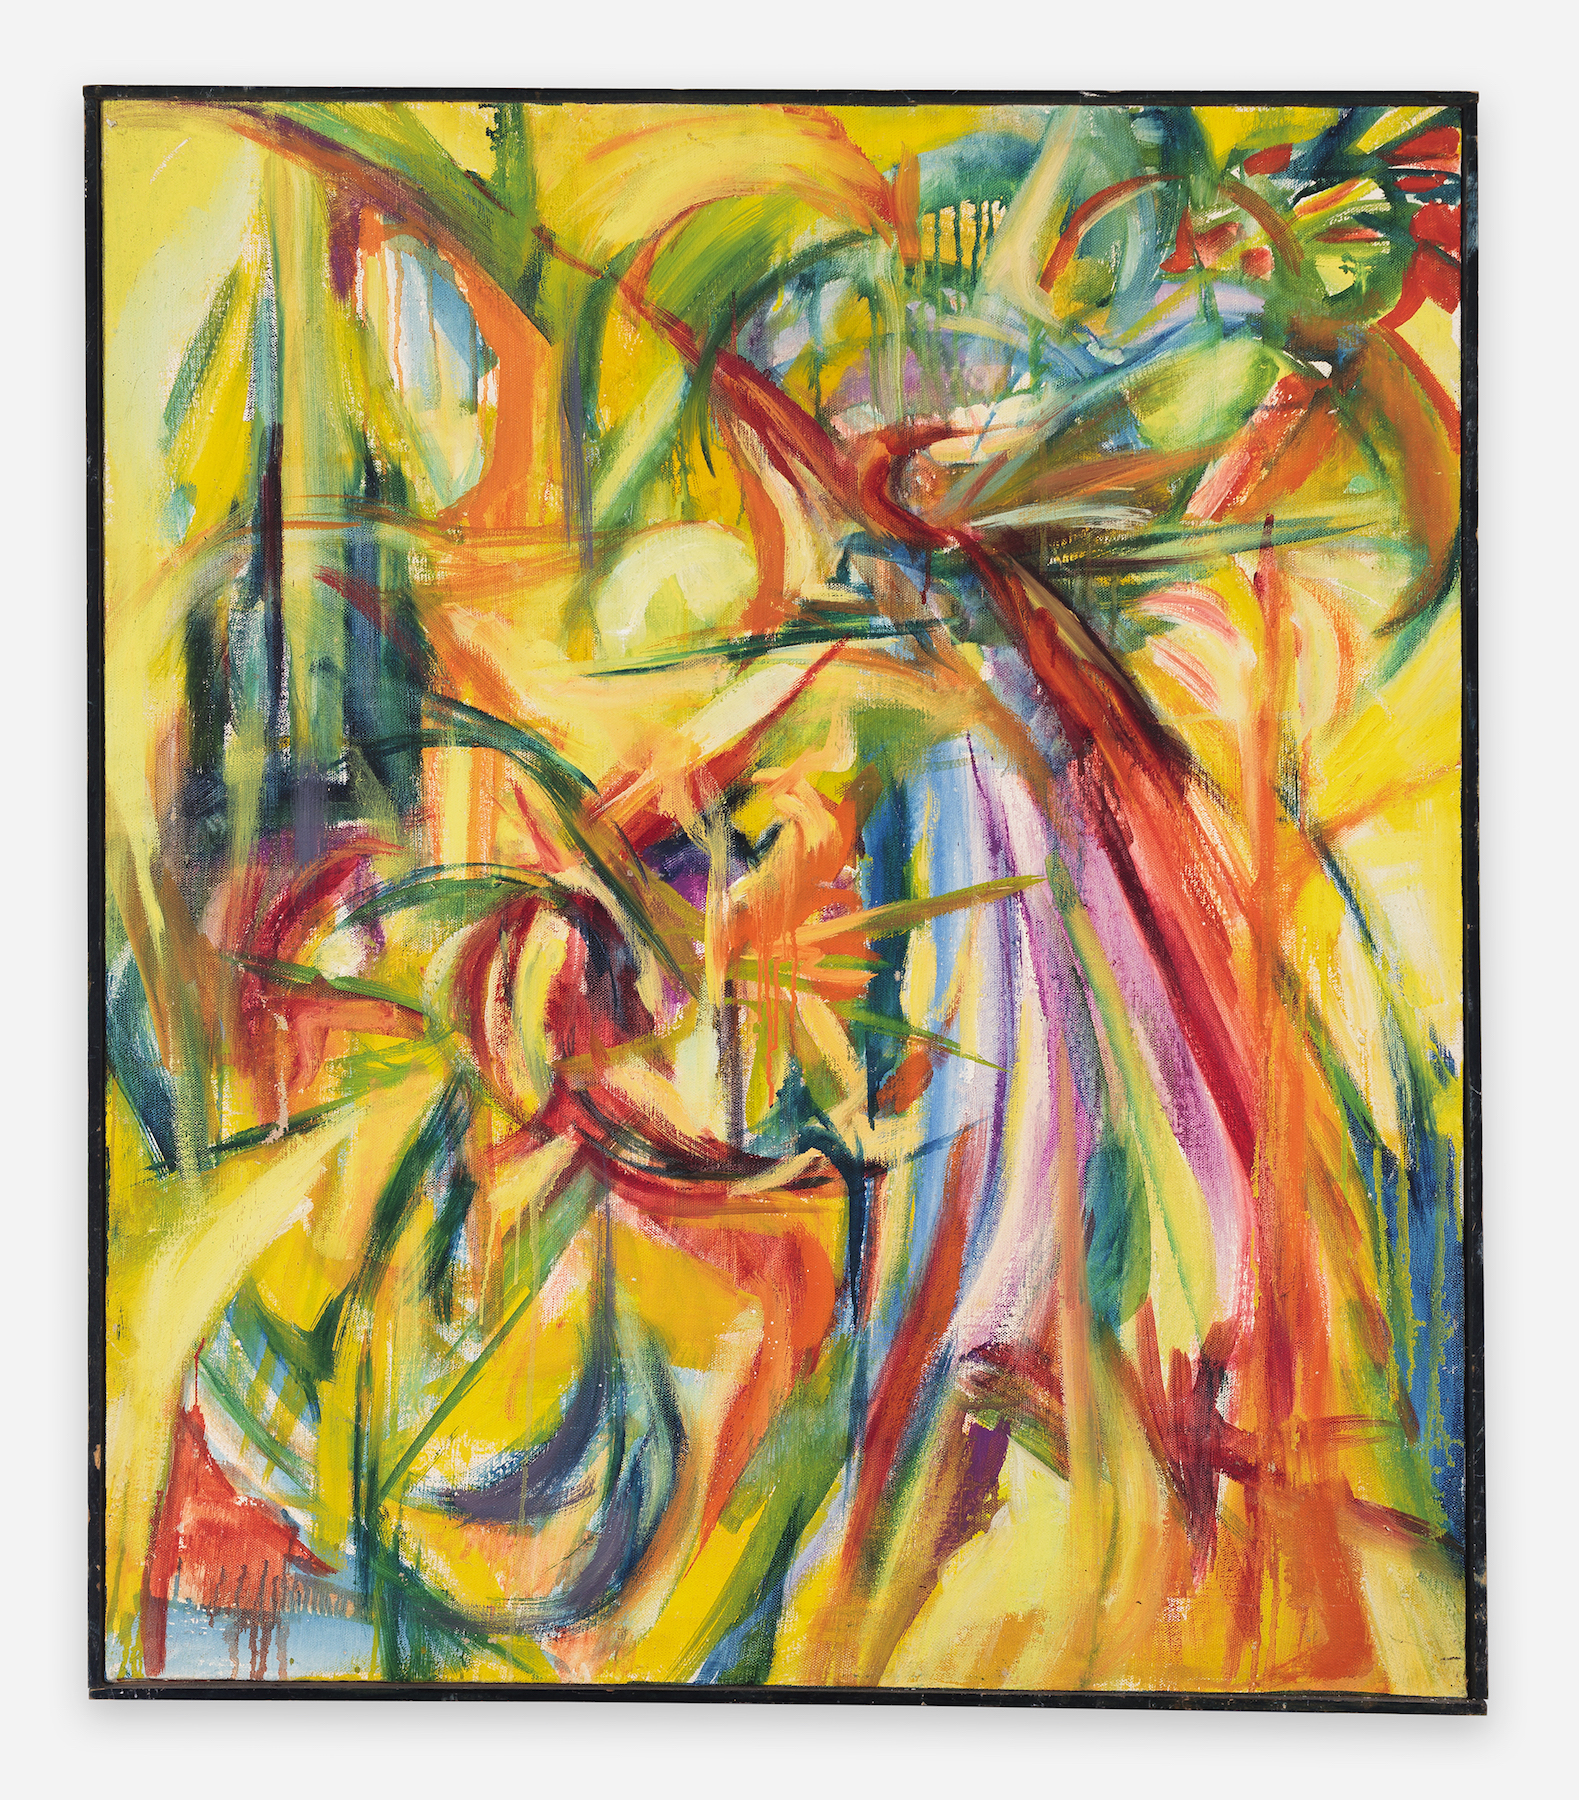 Gestural painting that is mostly yellow with greens, blues, pinks, reds, and oranges.